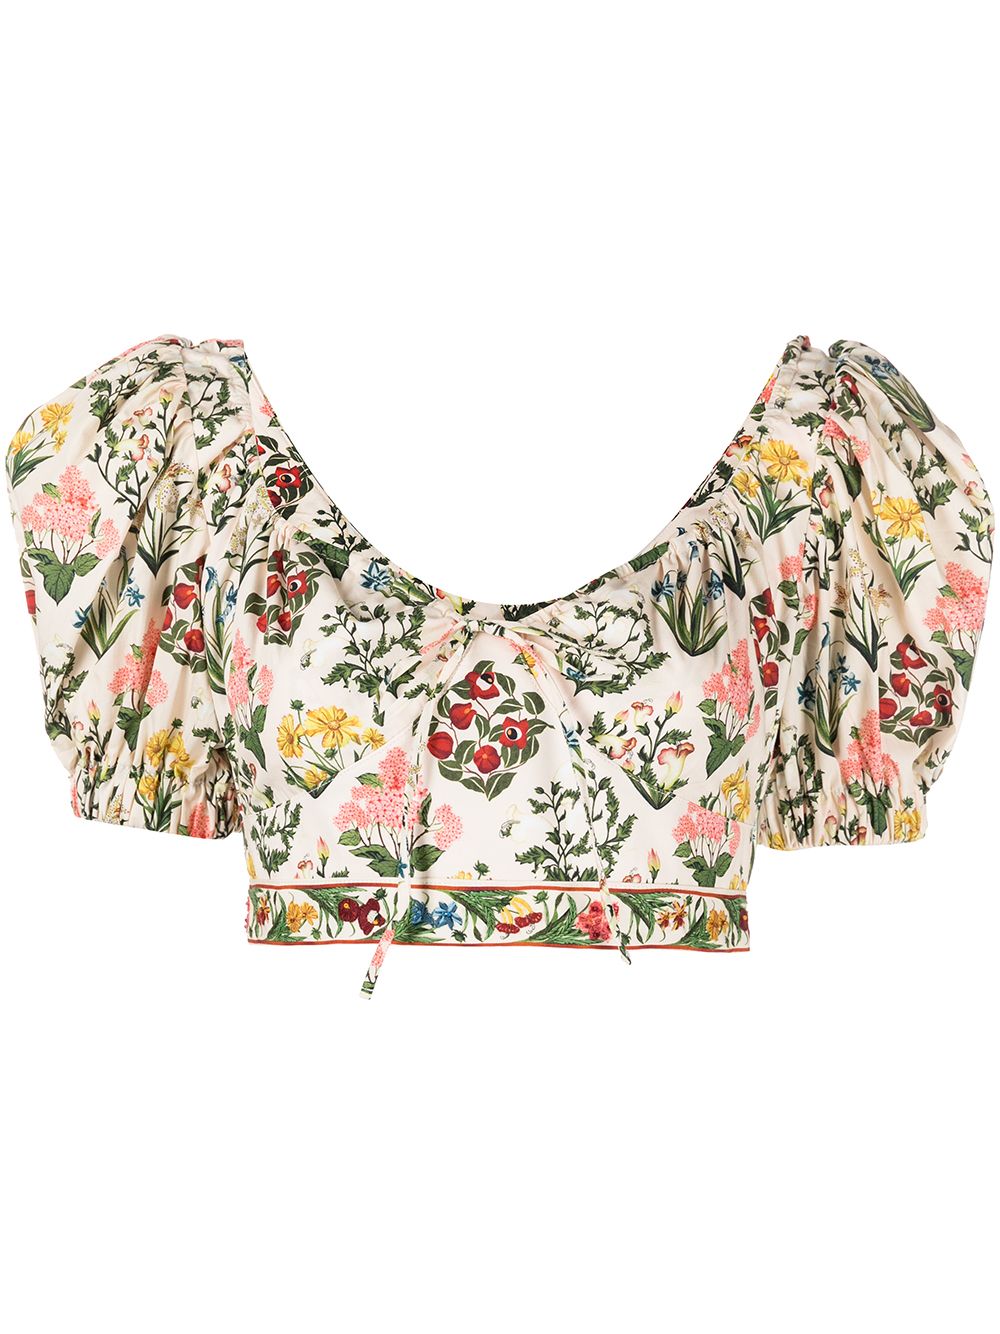 floral-print cropped top